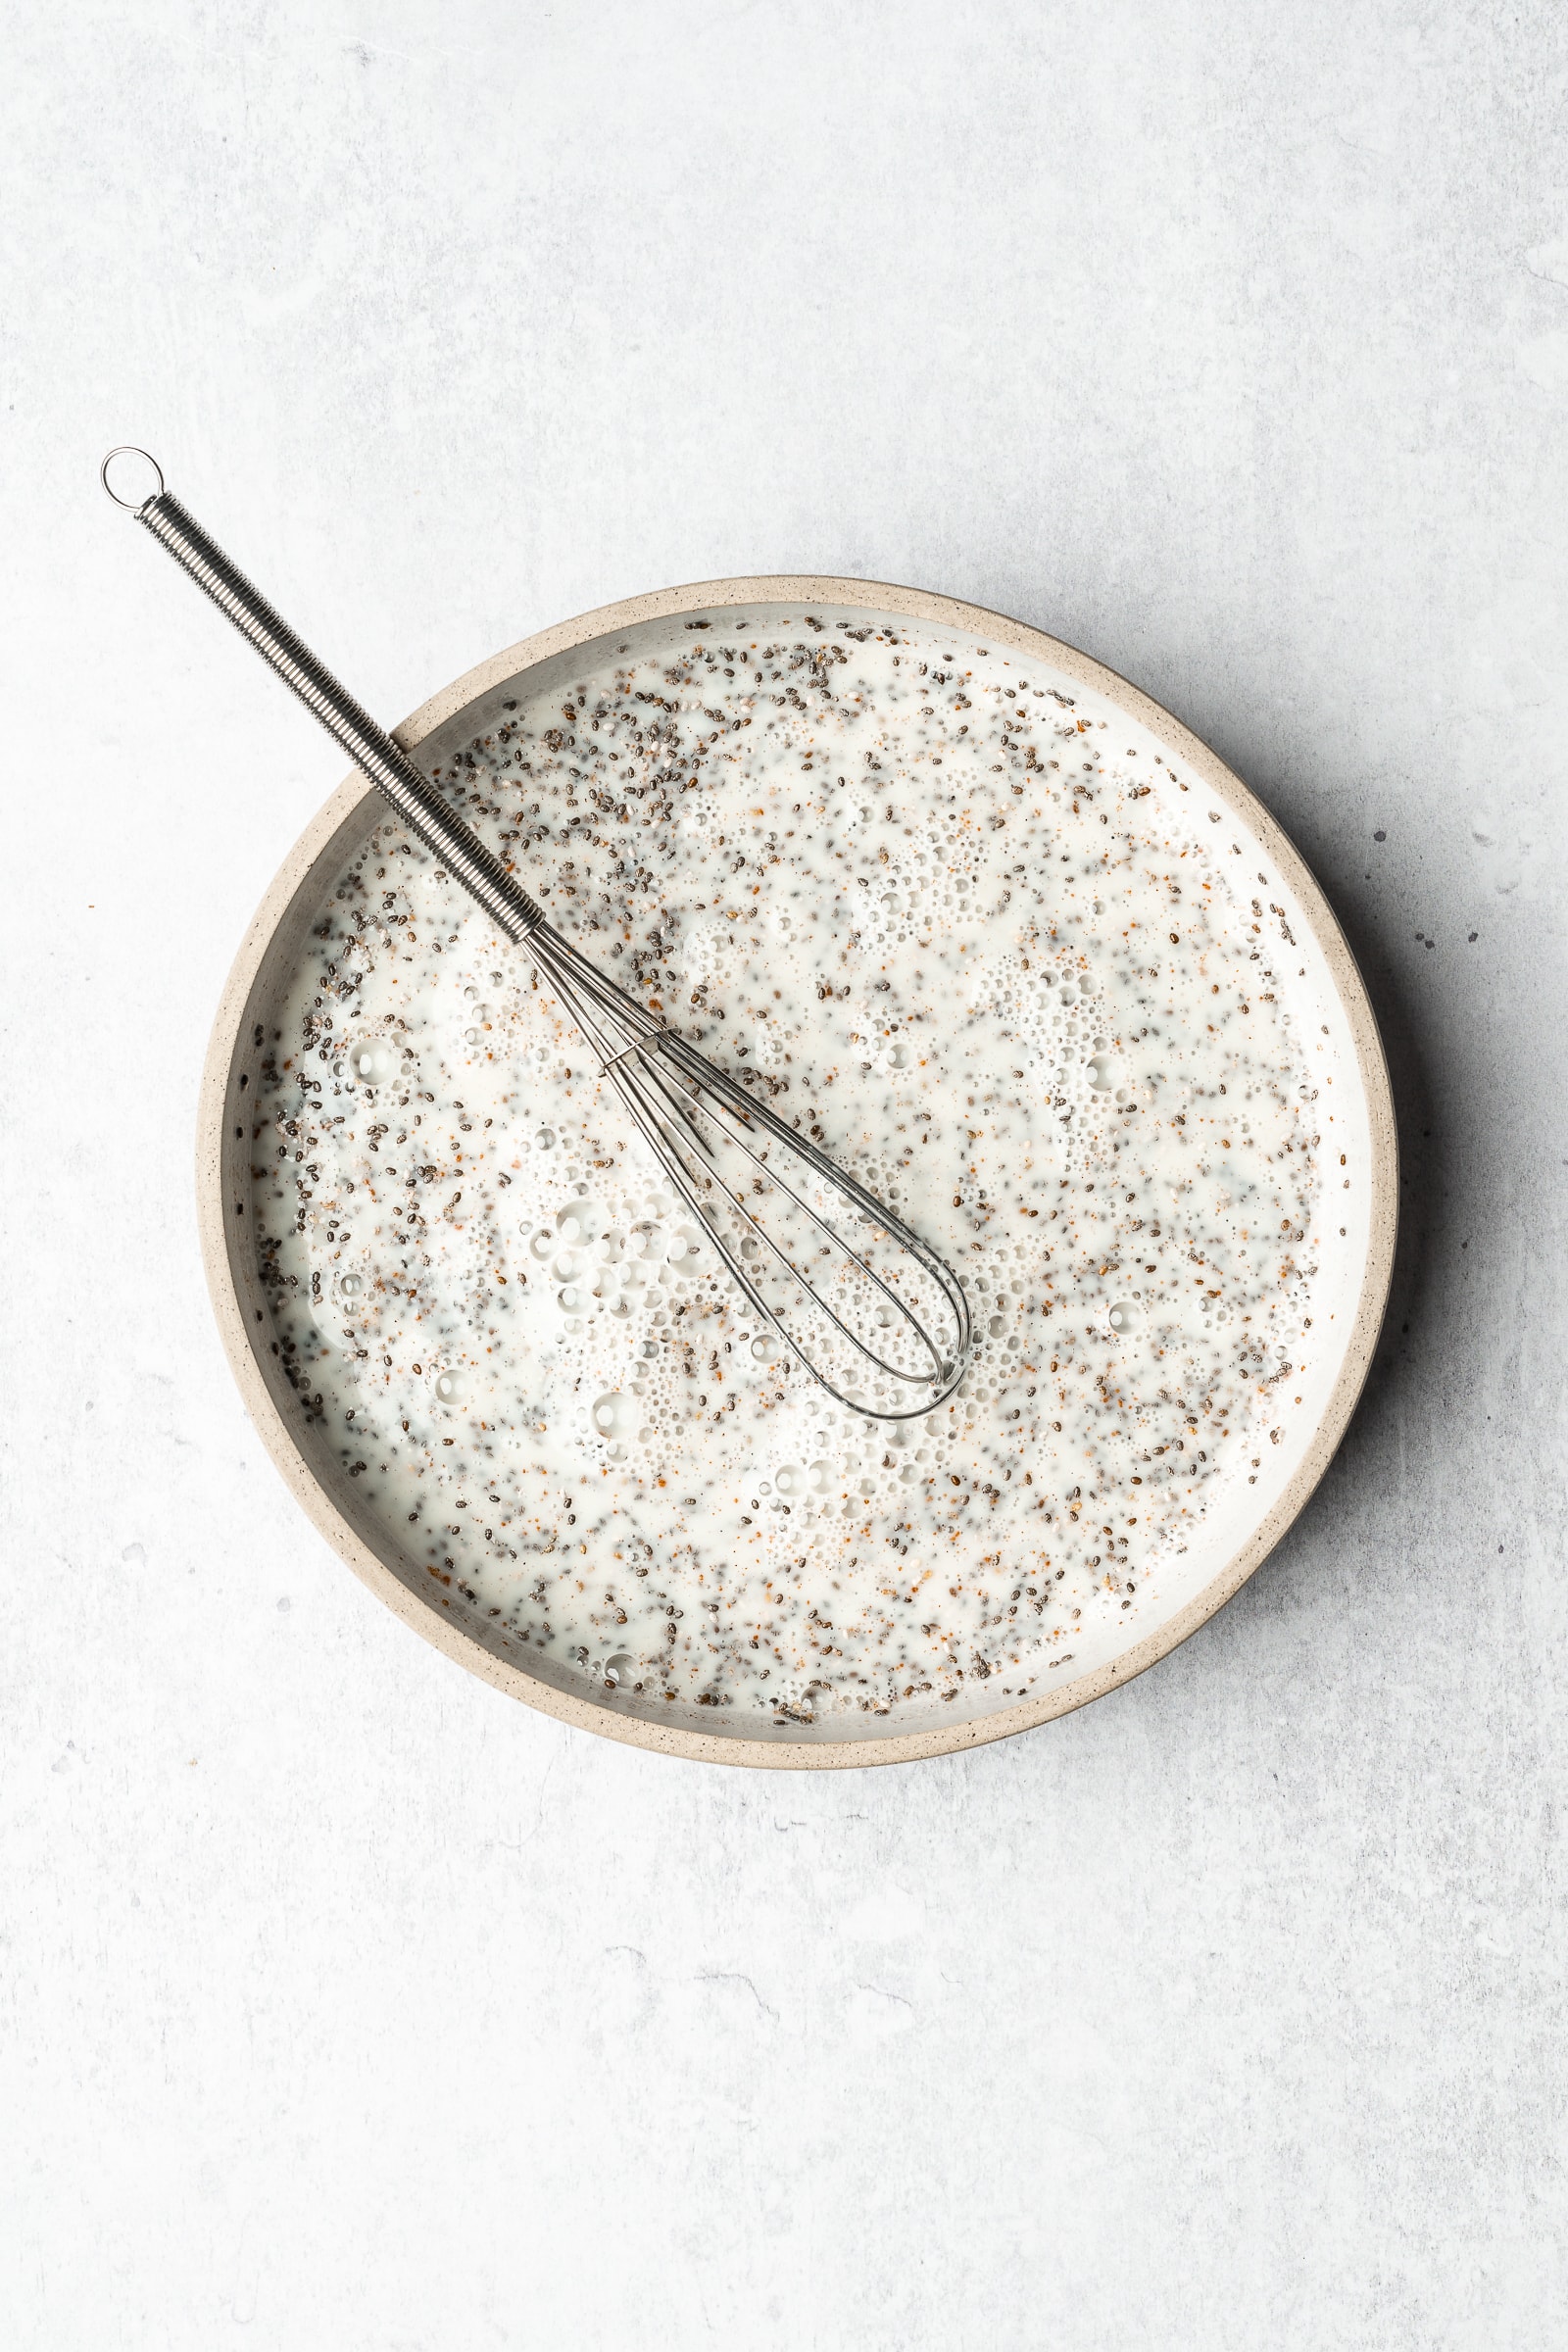 chia seed pudding in a shallow bowl before being refridgerated.